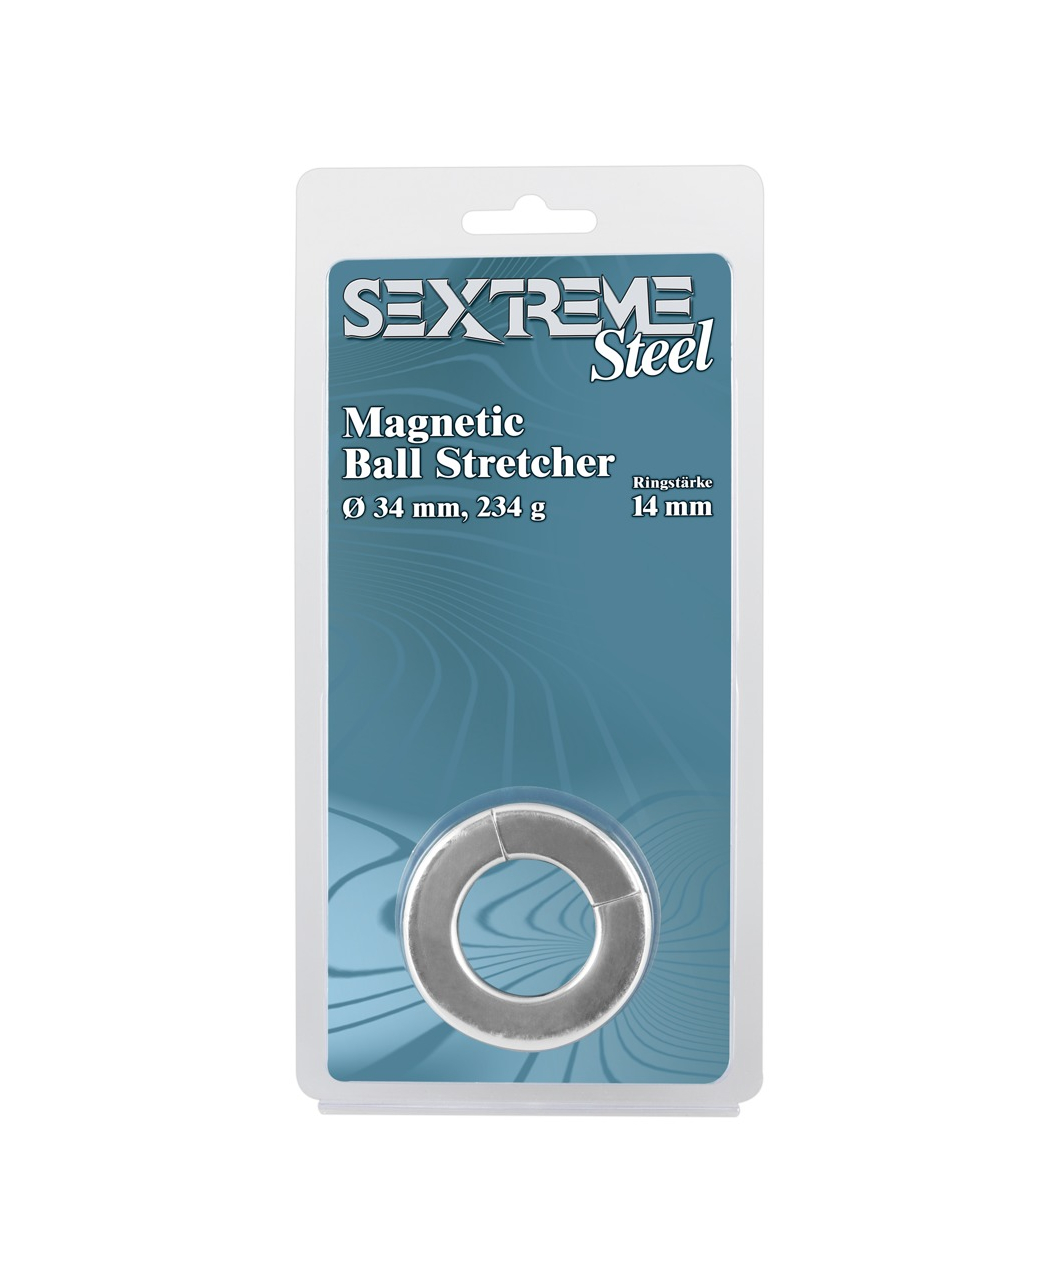 Sextreme Flat Magnetic Ball Stretcher